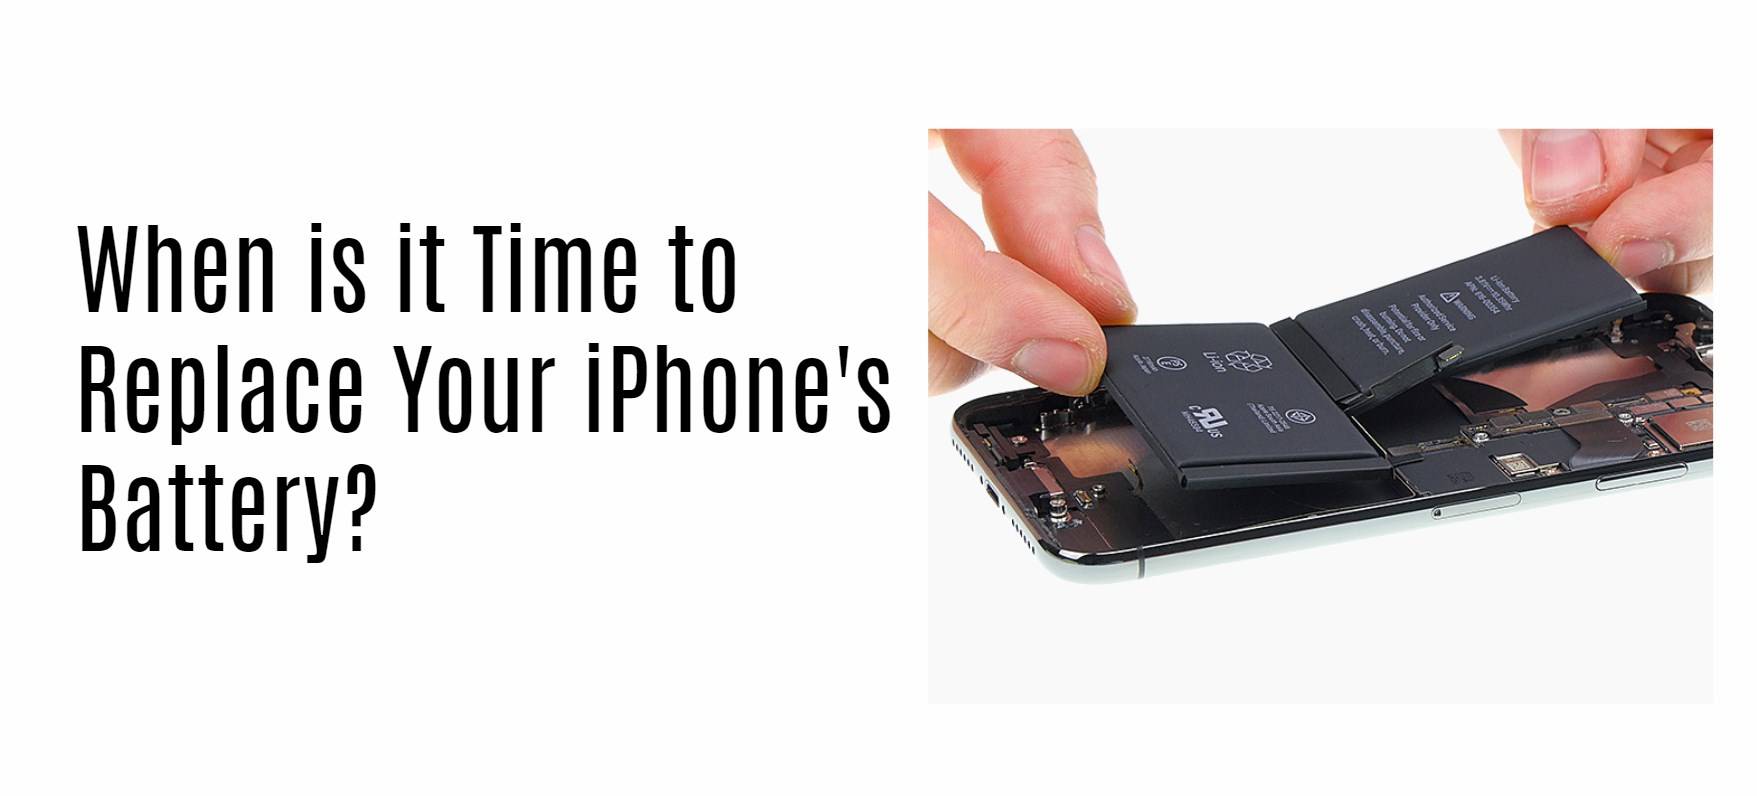 When is it Time to Replace Your iPhone's Battery?